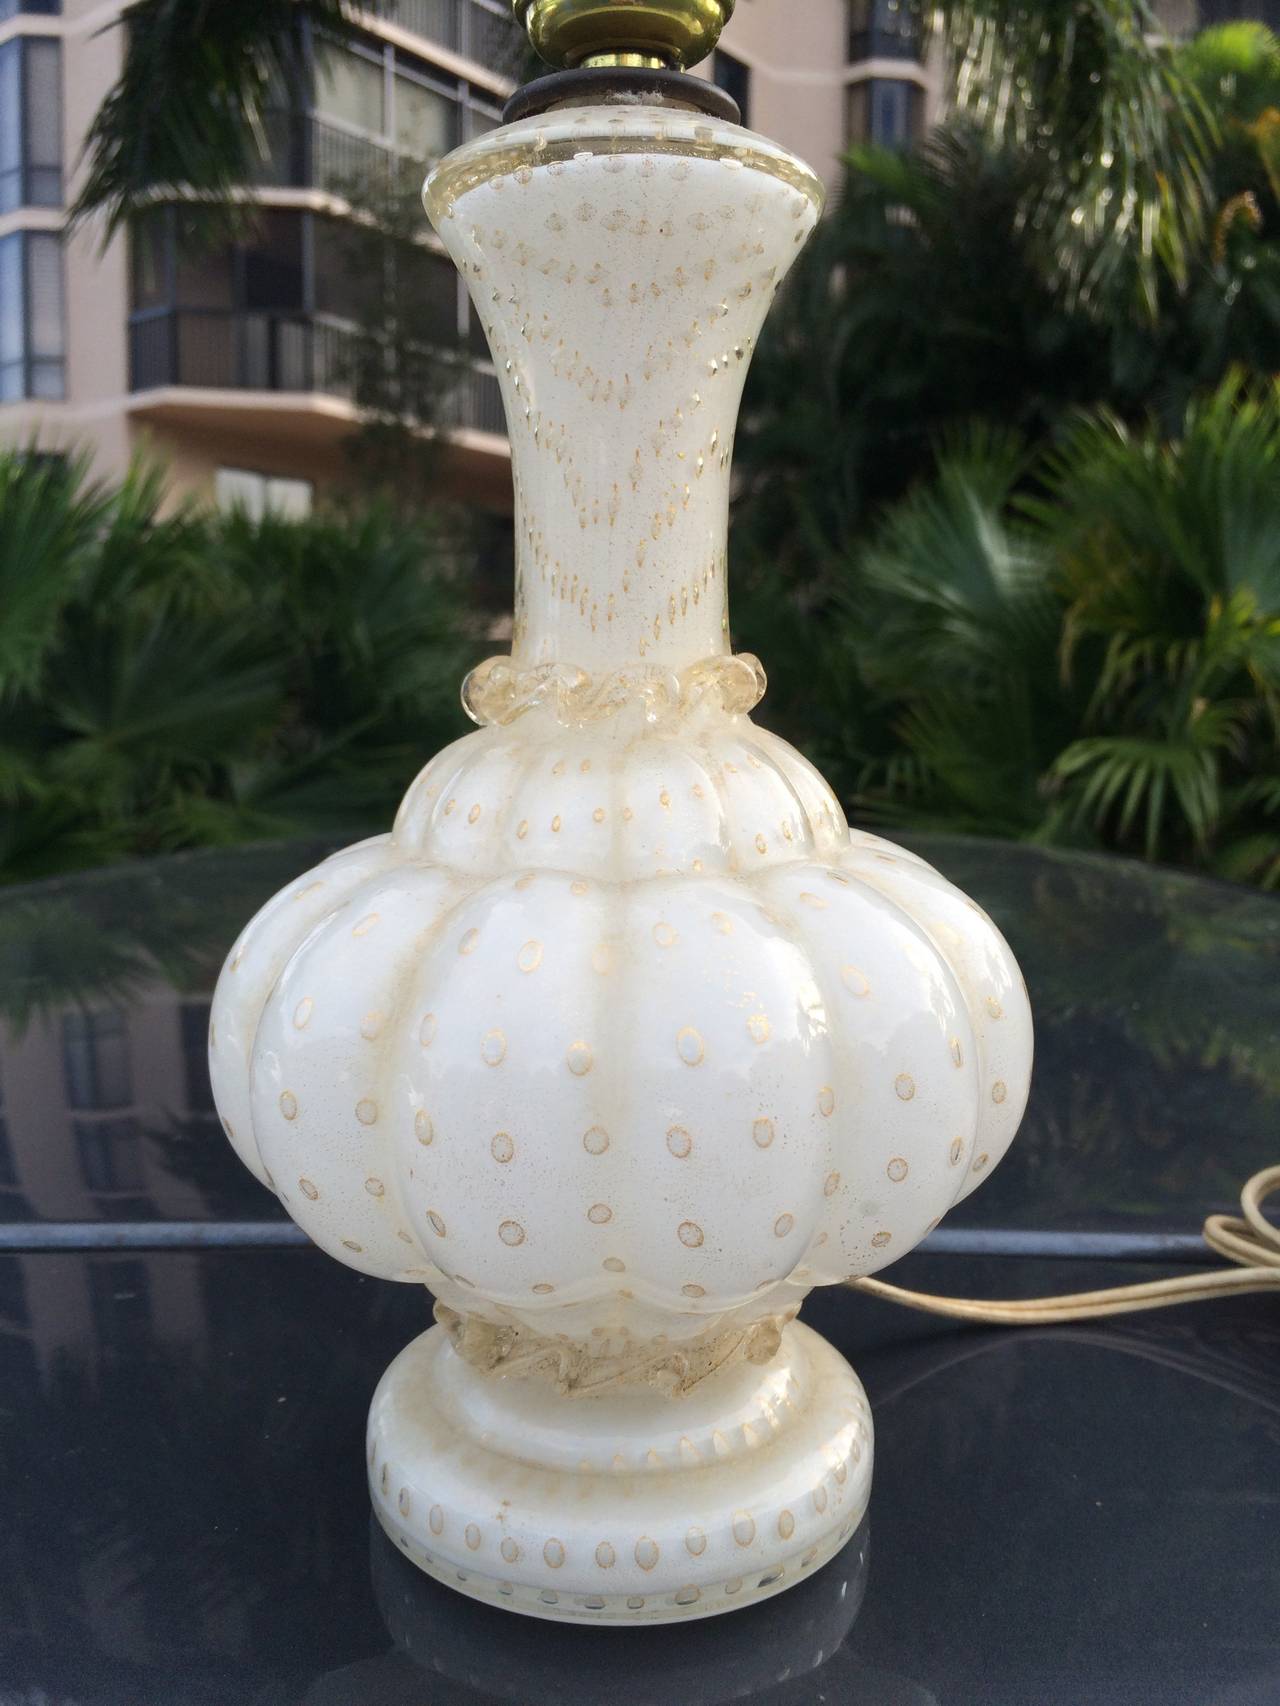 Early Murano glass table lamp by Barovier & Toso, c. 1950, Italy. Controlled bubbles and applied decoration to a classic form Italian vase. White, cream and golf leaf throughout. Height to socket, base diameter 3.5